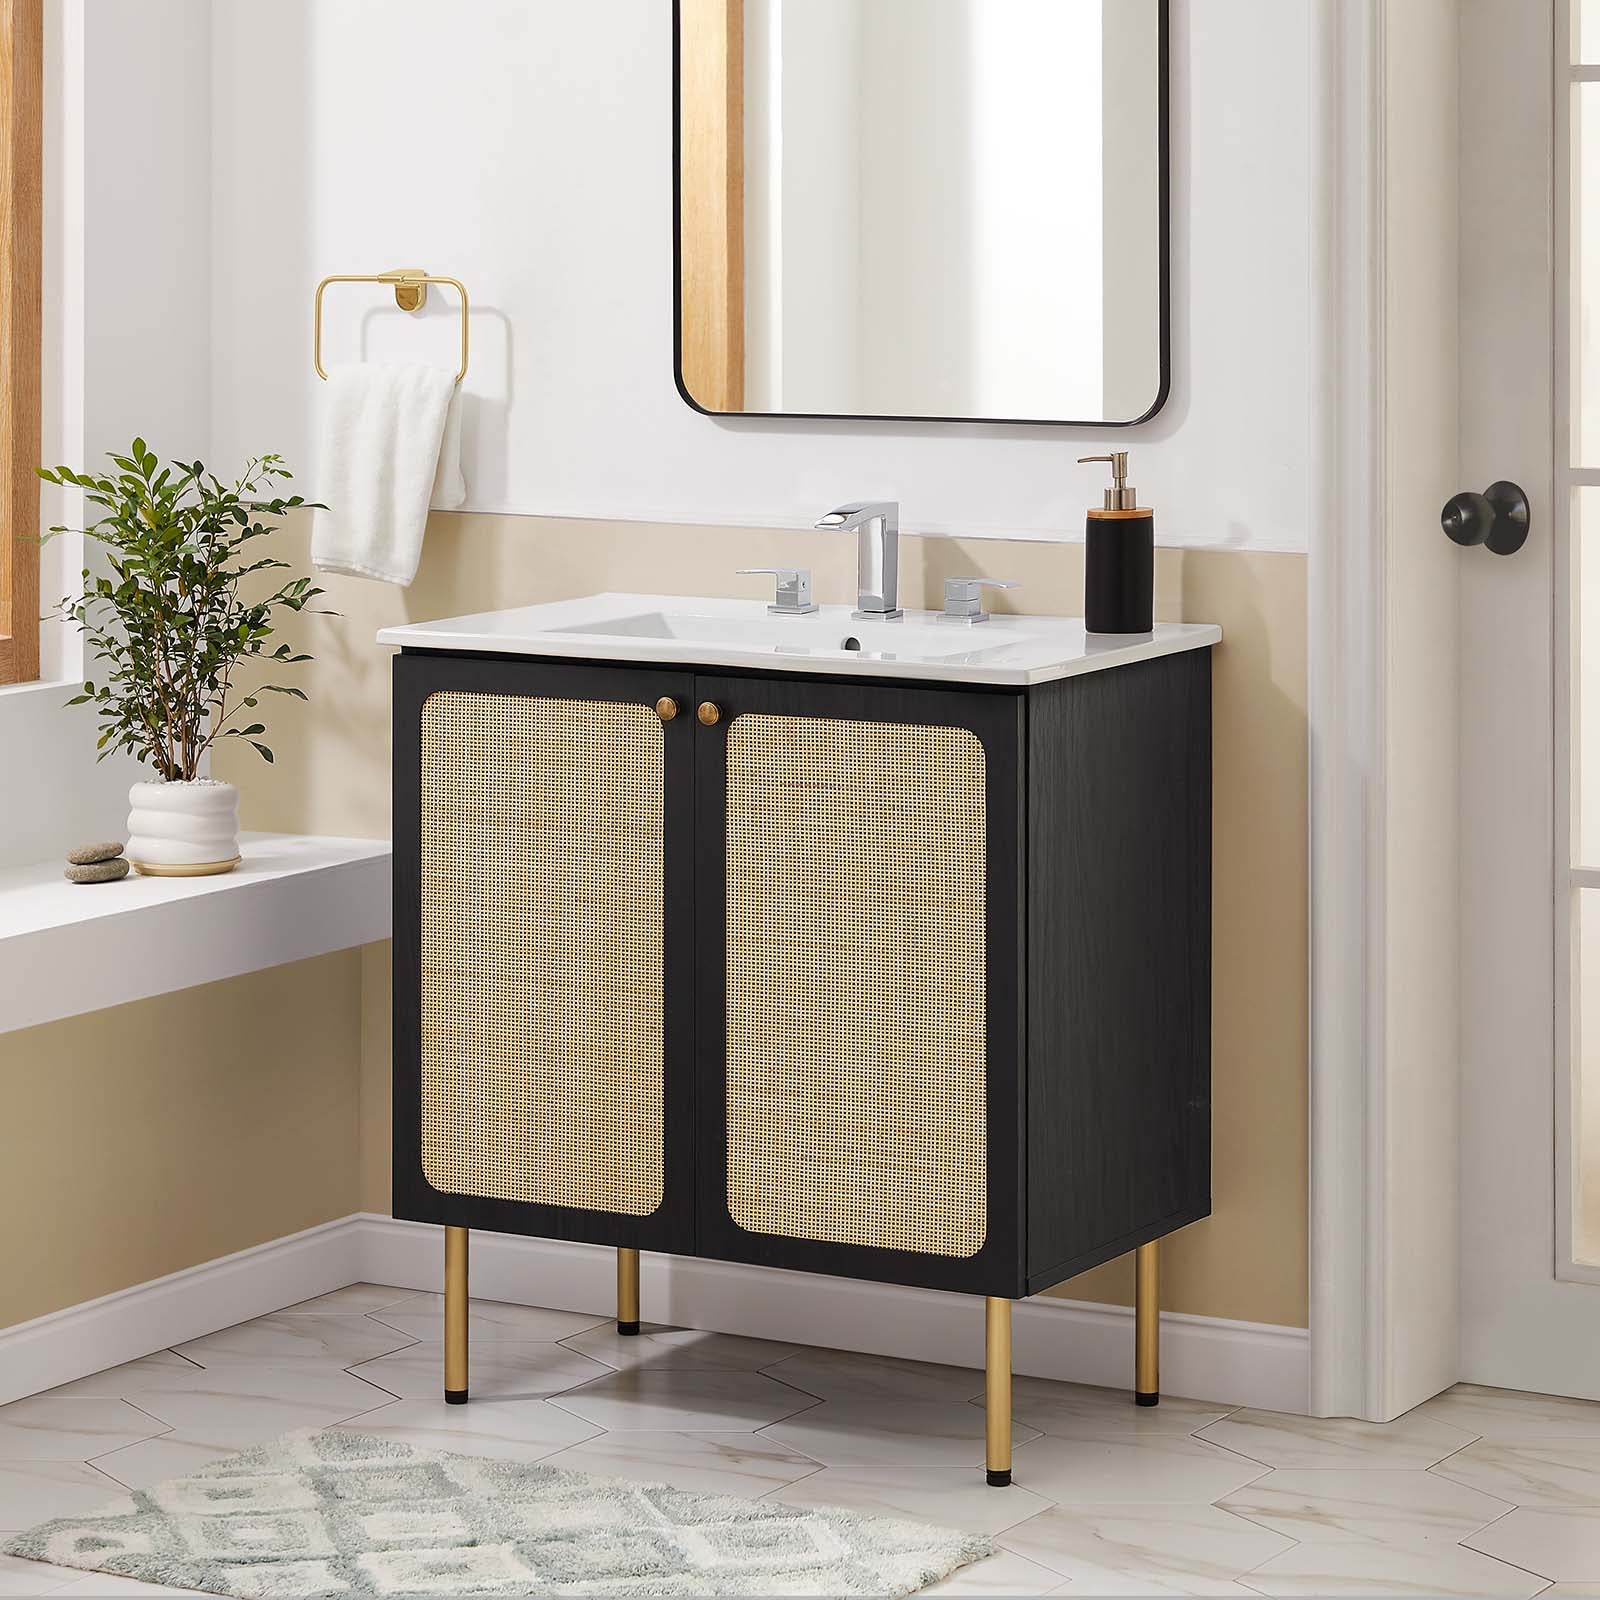 Chaucer 30" Bathroom Vanity Cabinet (Sink Basin Not Included) - East Shore Modern Home Furnishings